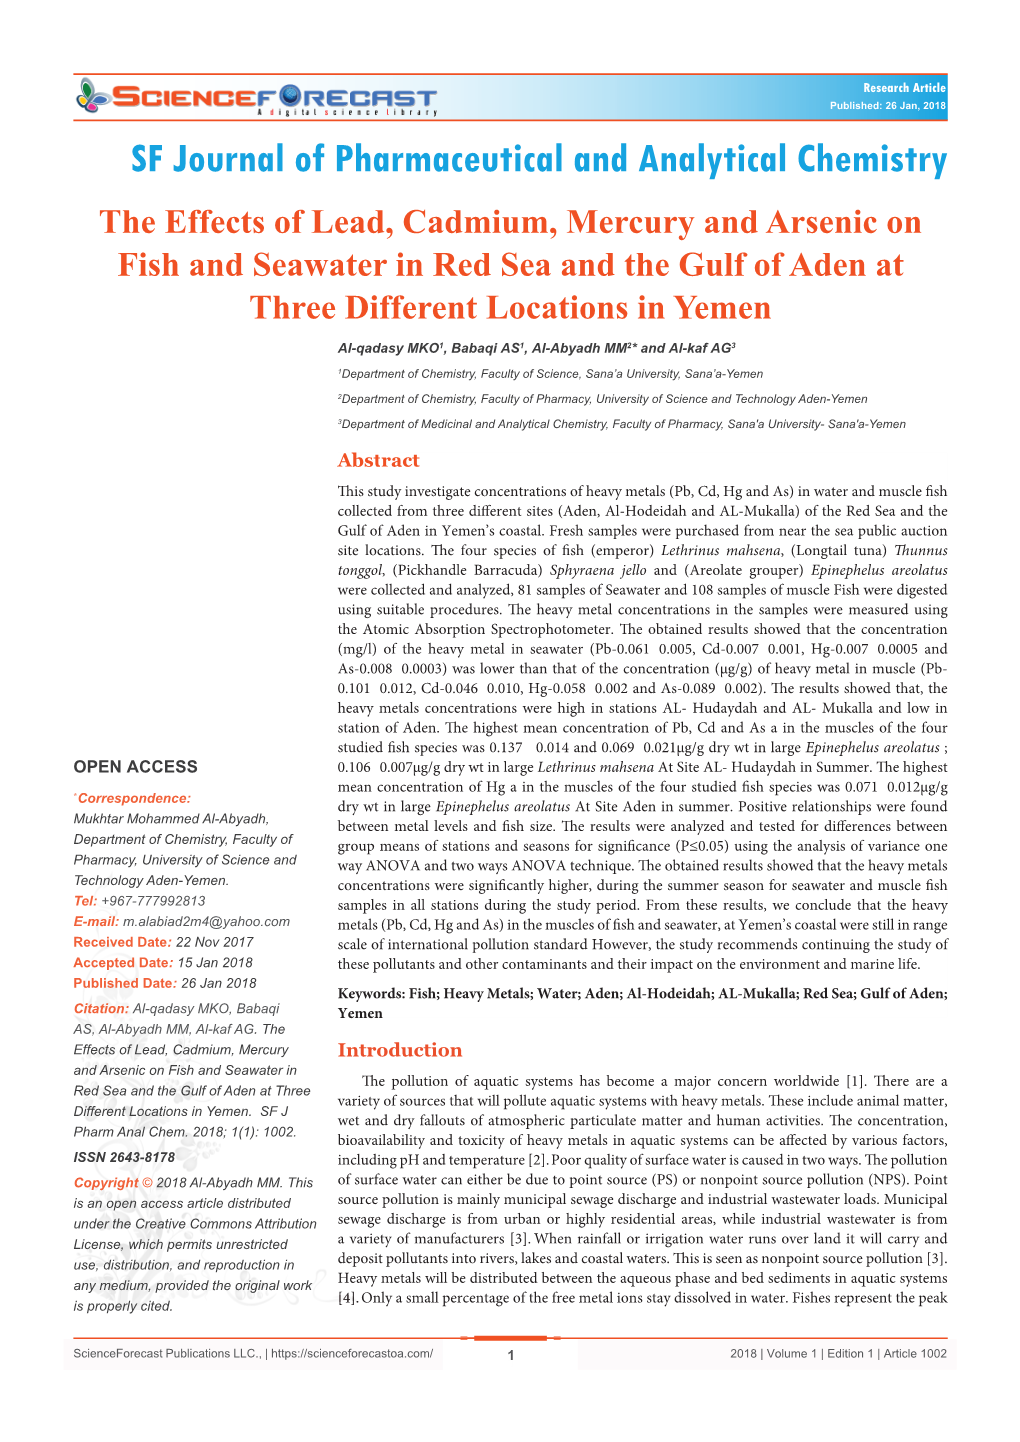 The Effects of Lead, Cadmium, Mercury and Arsenic on Fish and Seawater in Red Sea and the Gulf of Aden at Three Different Locations in Yemen